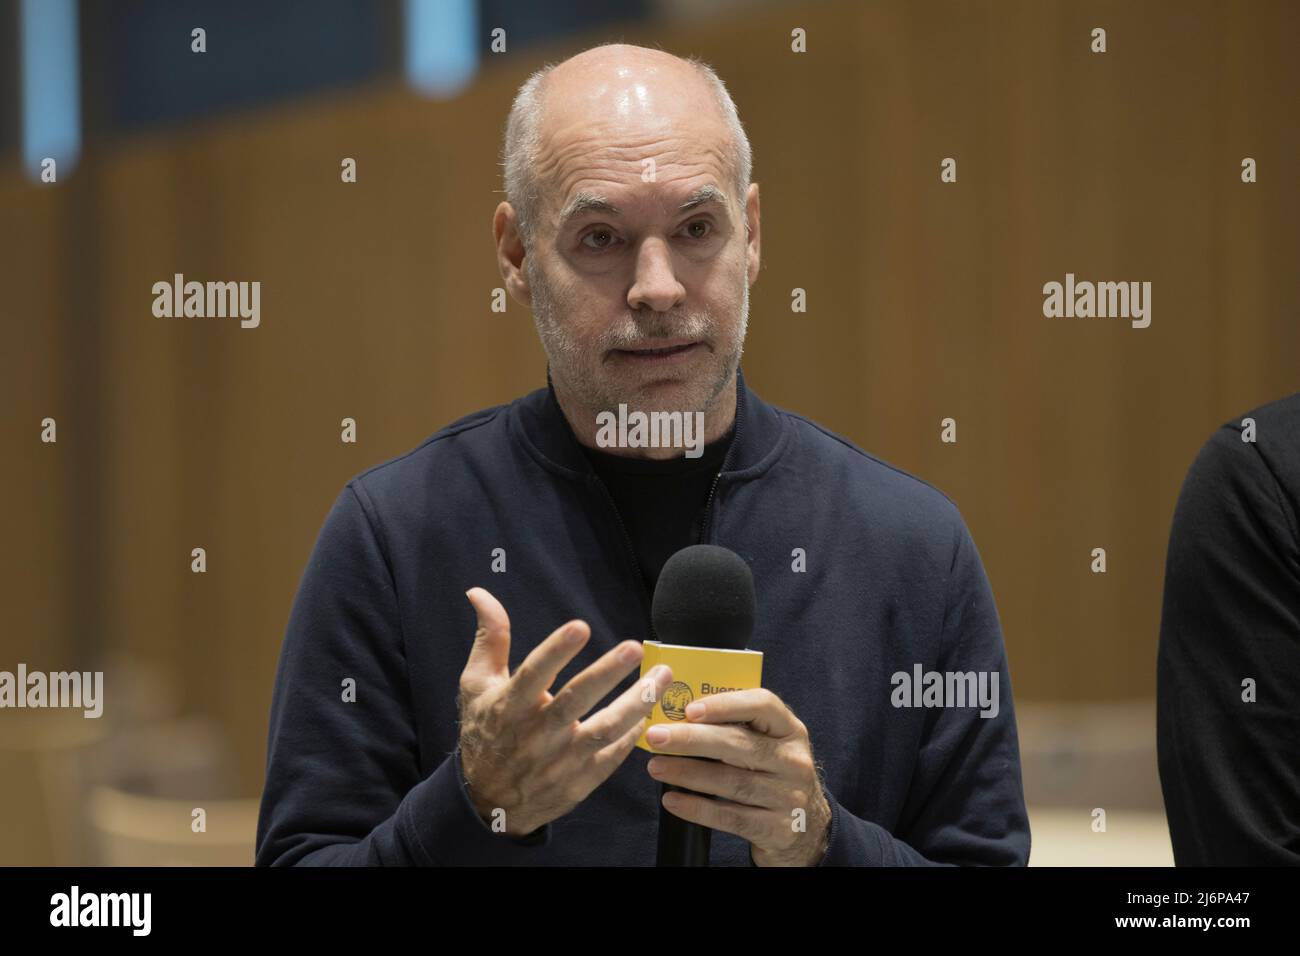 Buenos Aires, Argentina, 3rd May 2022. The Head of Government Horacio Rodríguez Larreta gave details about the work practices that began this year in public and private educational establishments for students who are in their last year of high school. (Credit image: Esteban Osorio/Alamy Live News) Stock Photo